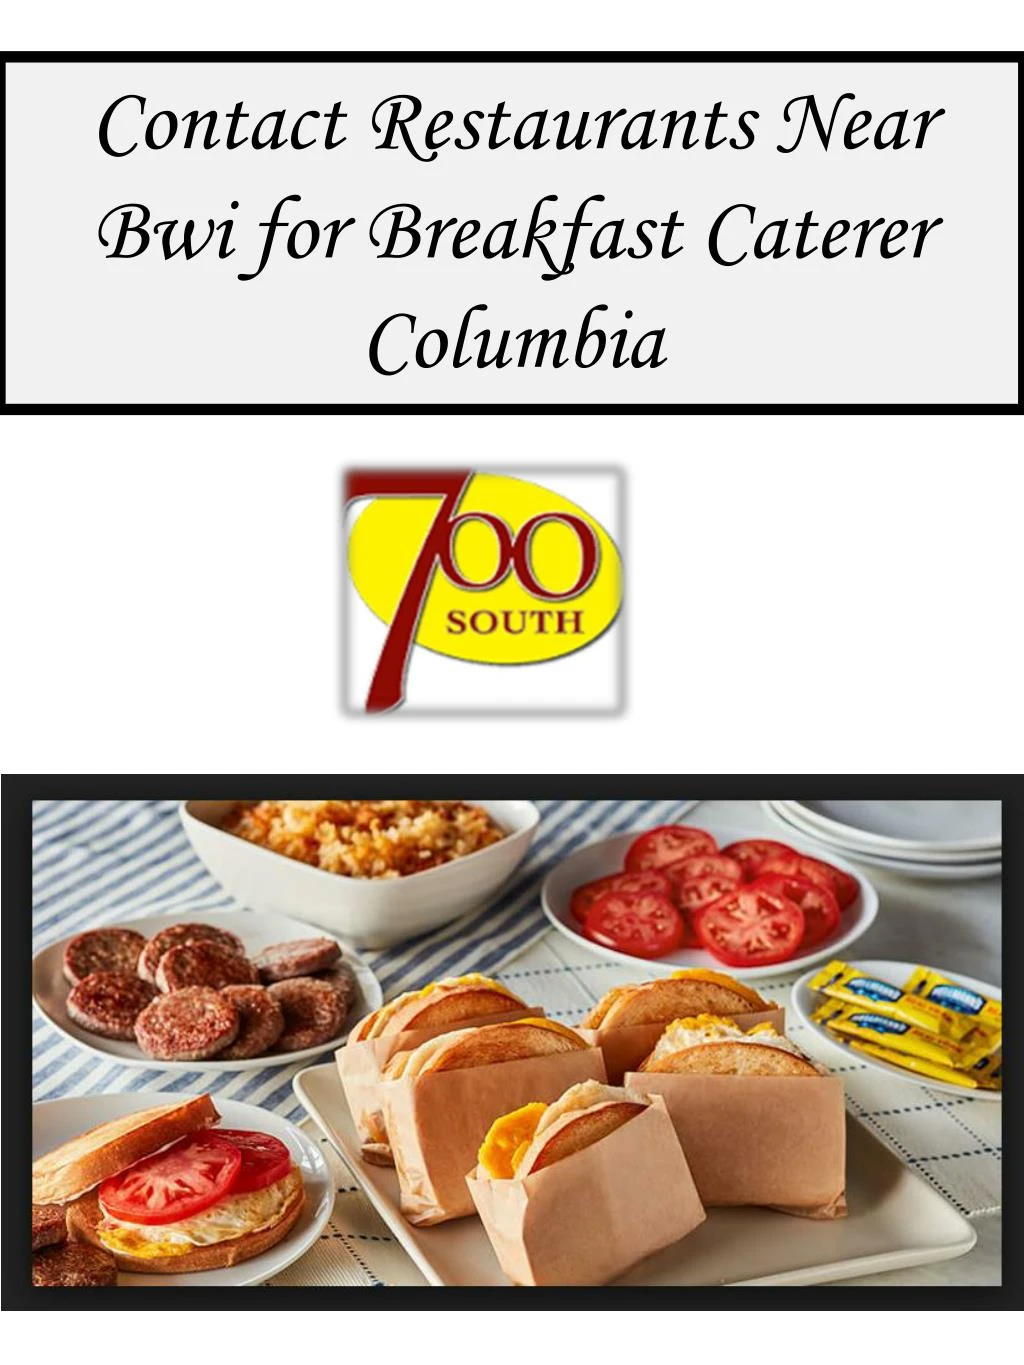 contact restaurants near bwi for breakfast caterer columbia